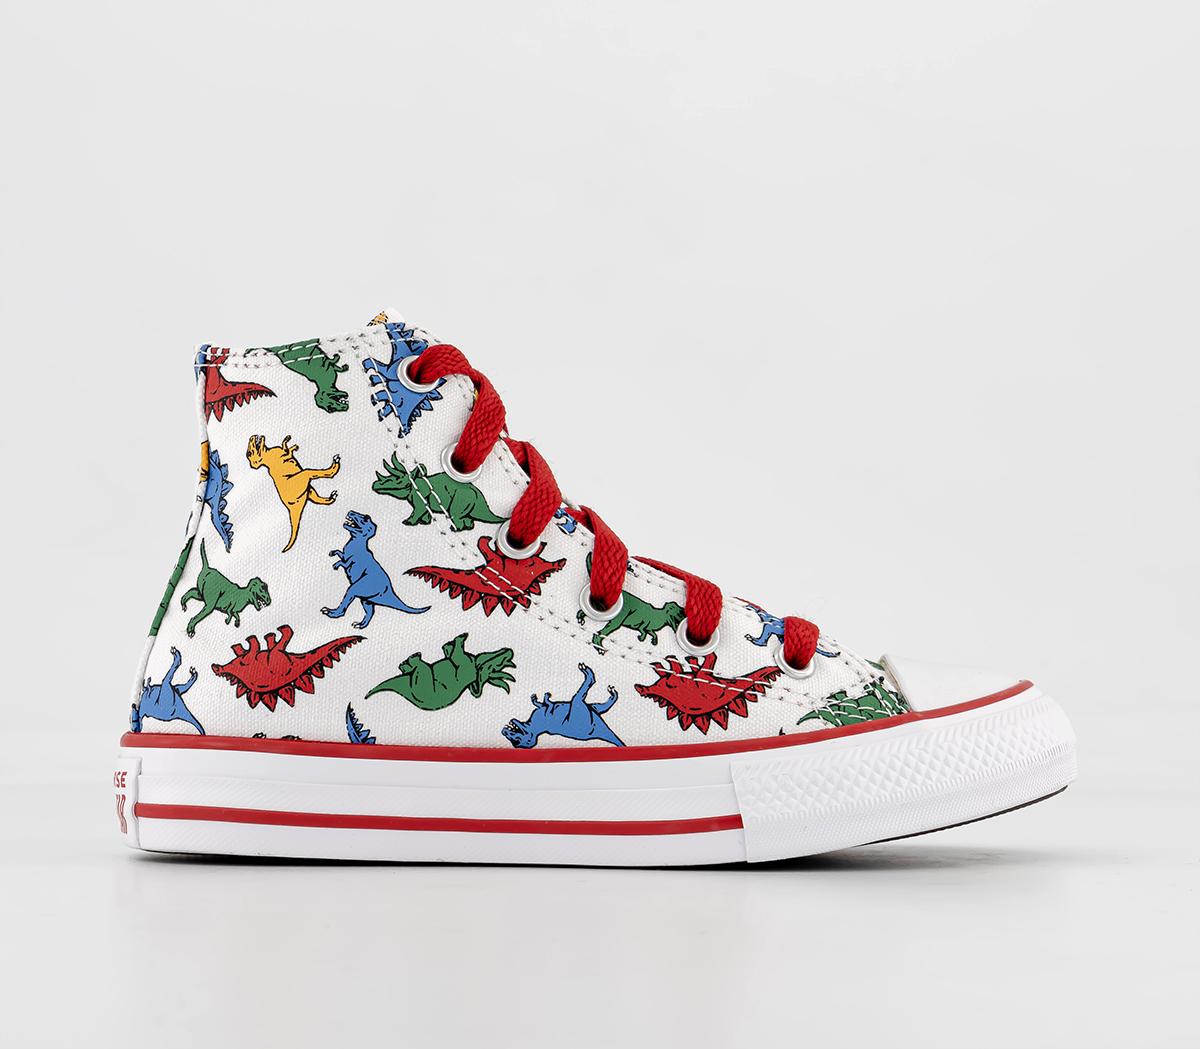 ConverseAll Star Hi Mid Sizes Trainers White Enamel Red Totally Blue Dino